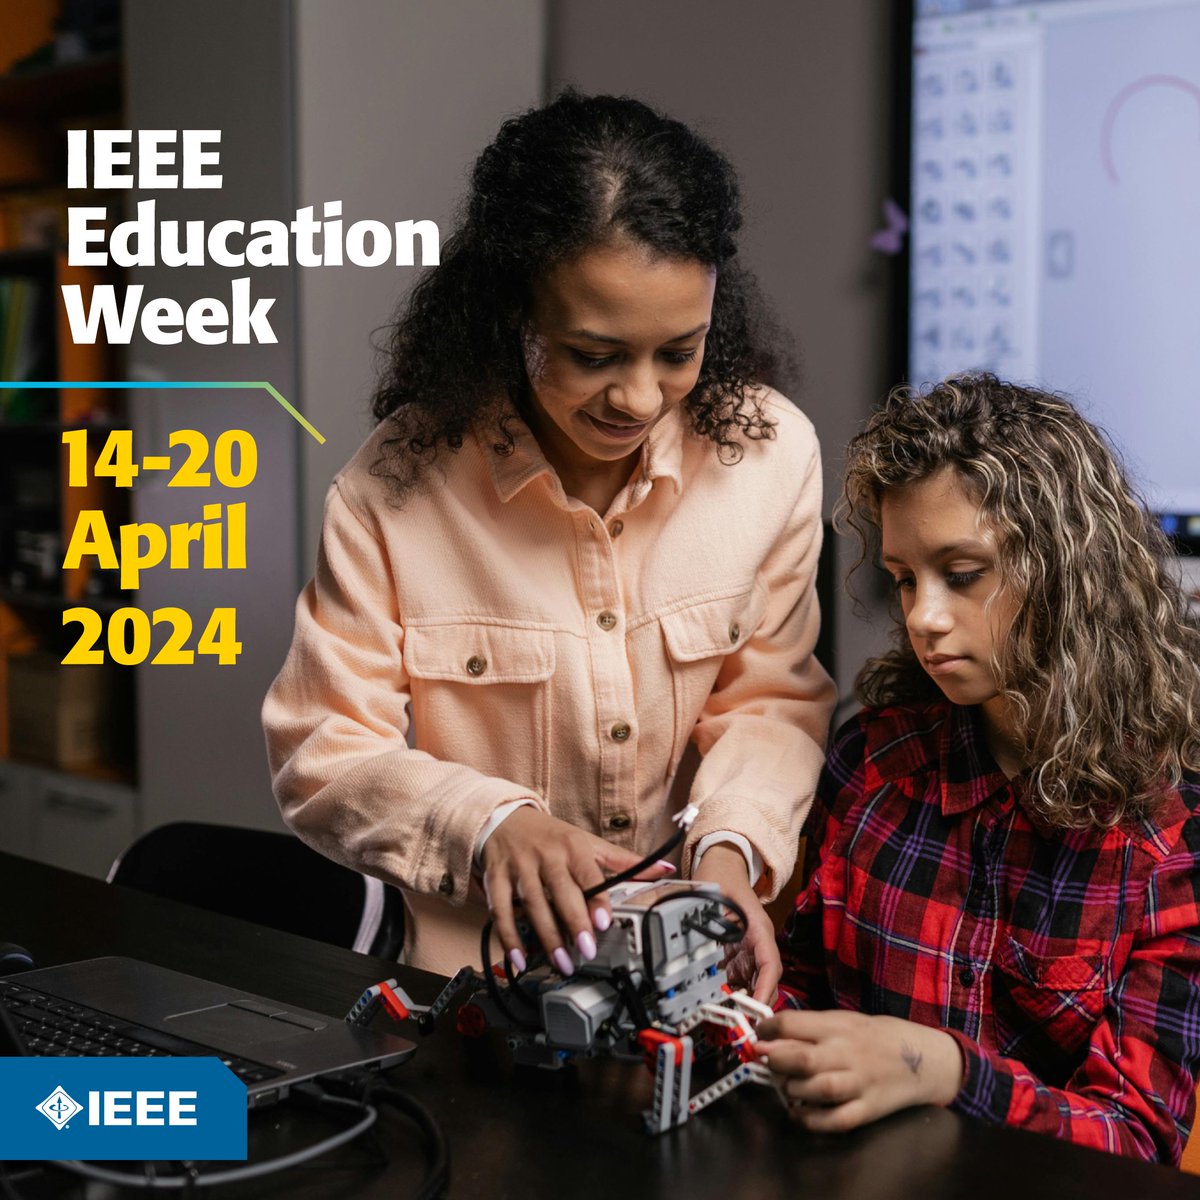 #IEEE Education Week is here! Celebrate with us and explore the numerous STEM education tools, resources and events for technologists of all ages offered by IEEE: bit.ly/3Je0Liq